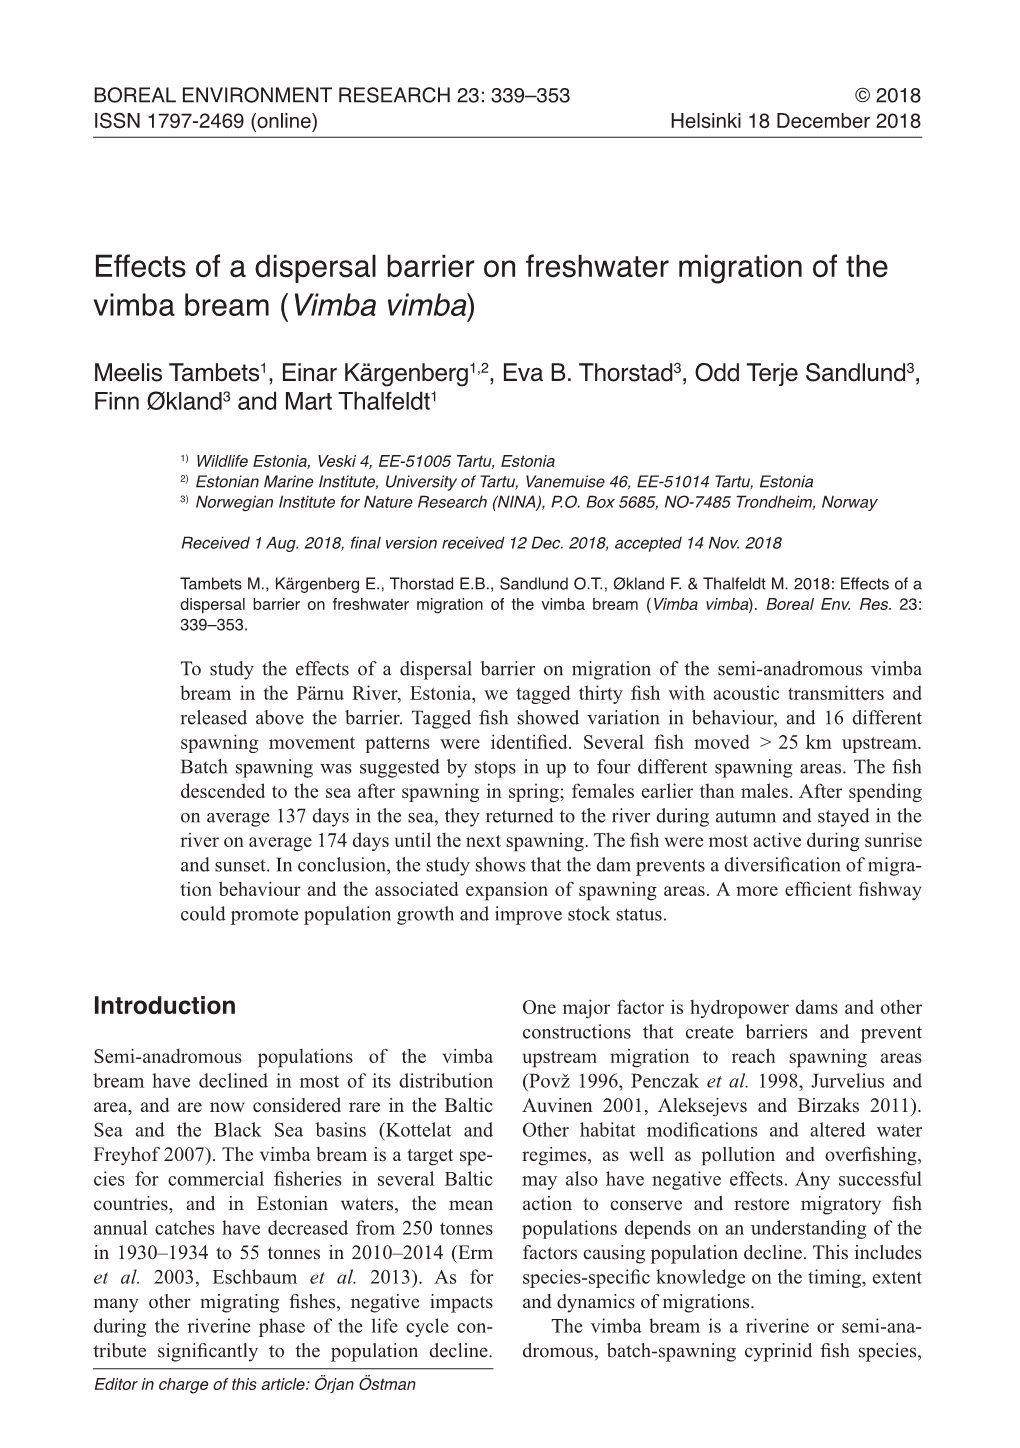 Effects of a Dispersal Barrier on Freshwater Migration of the Vimba Bream (Vimba Vimba)